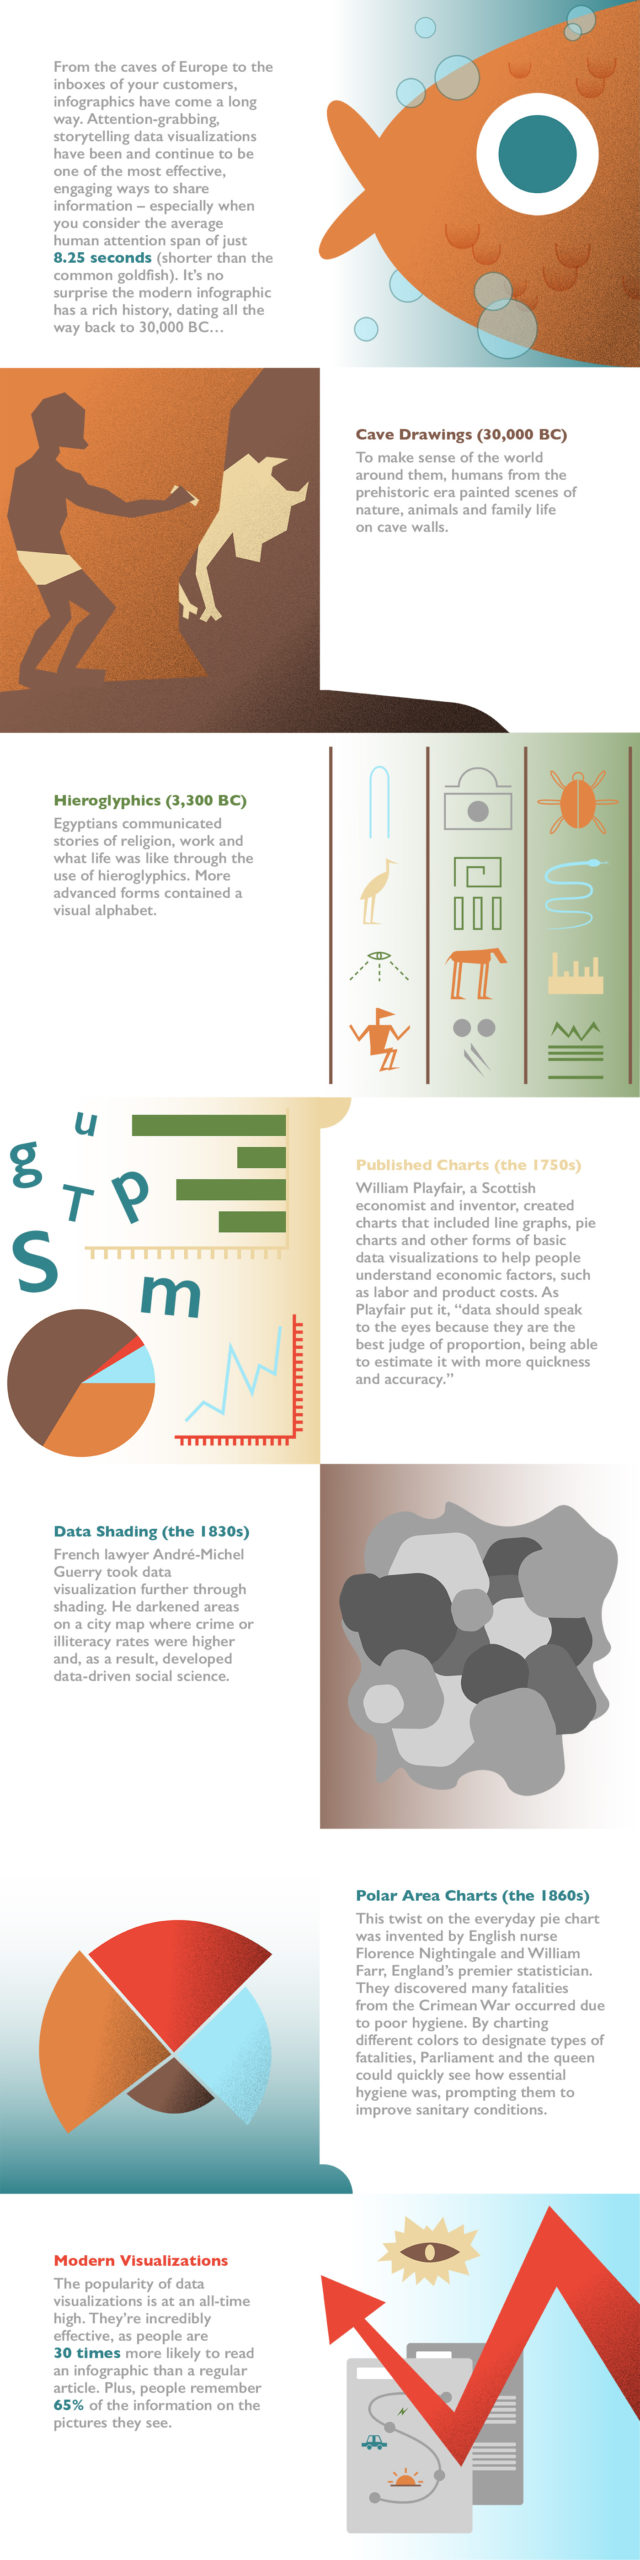 infographic definition iconographic painting